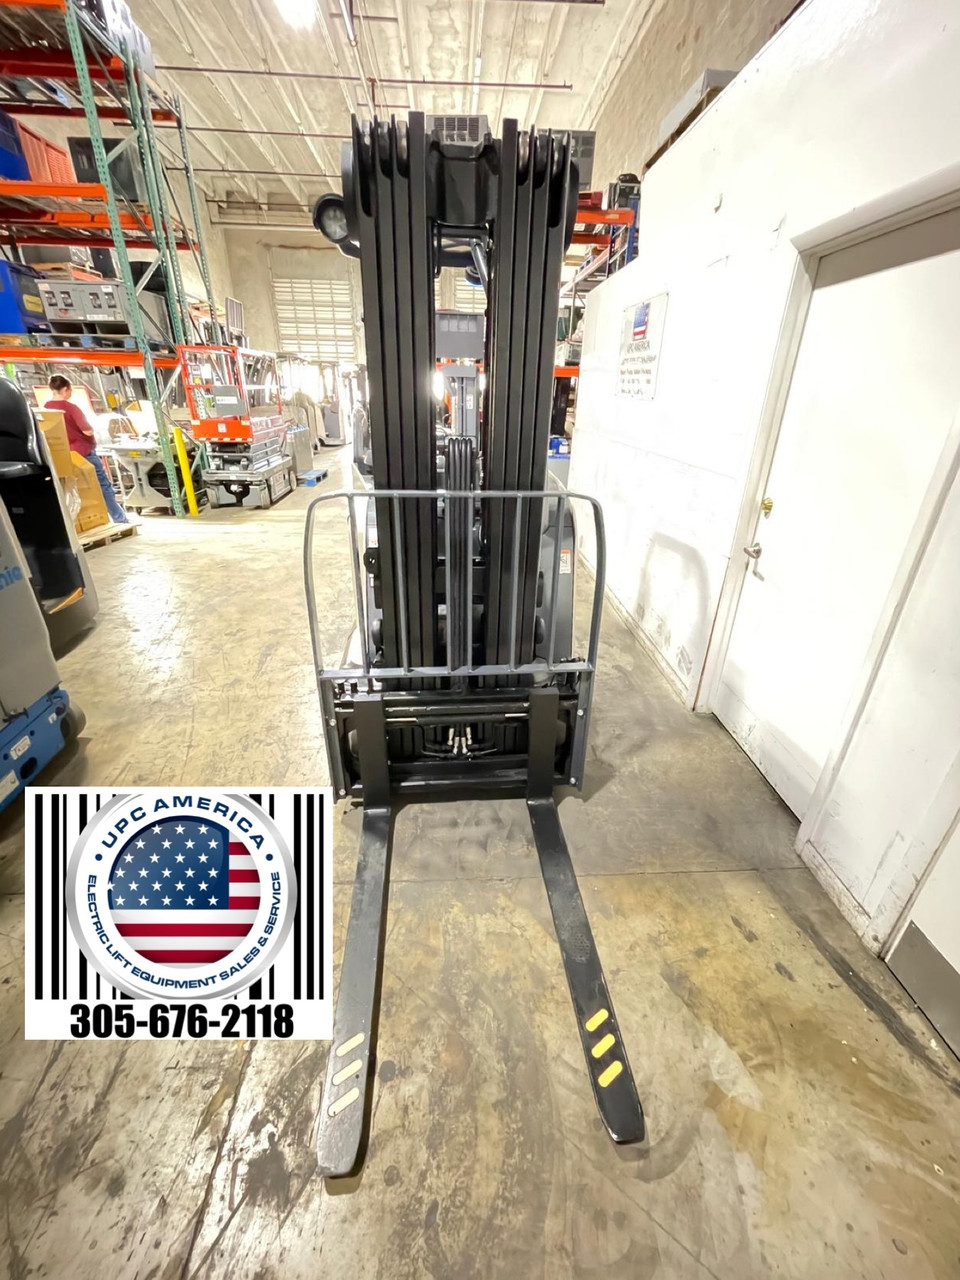 Certified pre-owned electric forklift for sale